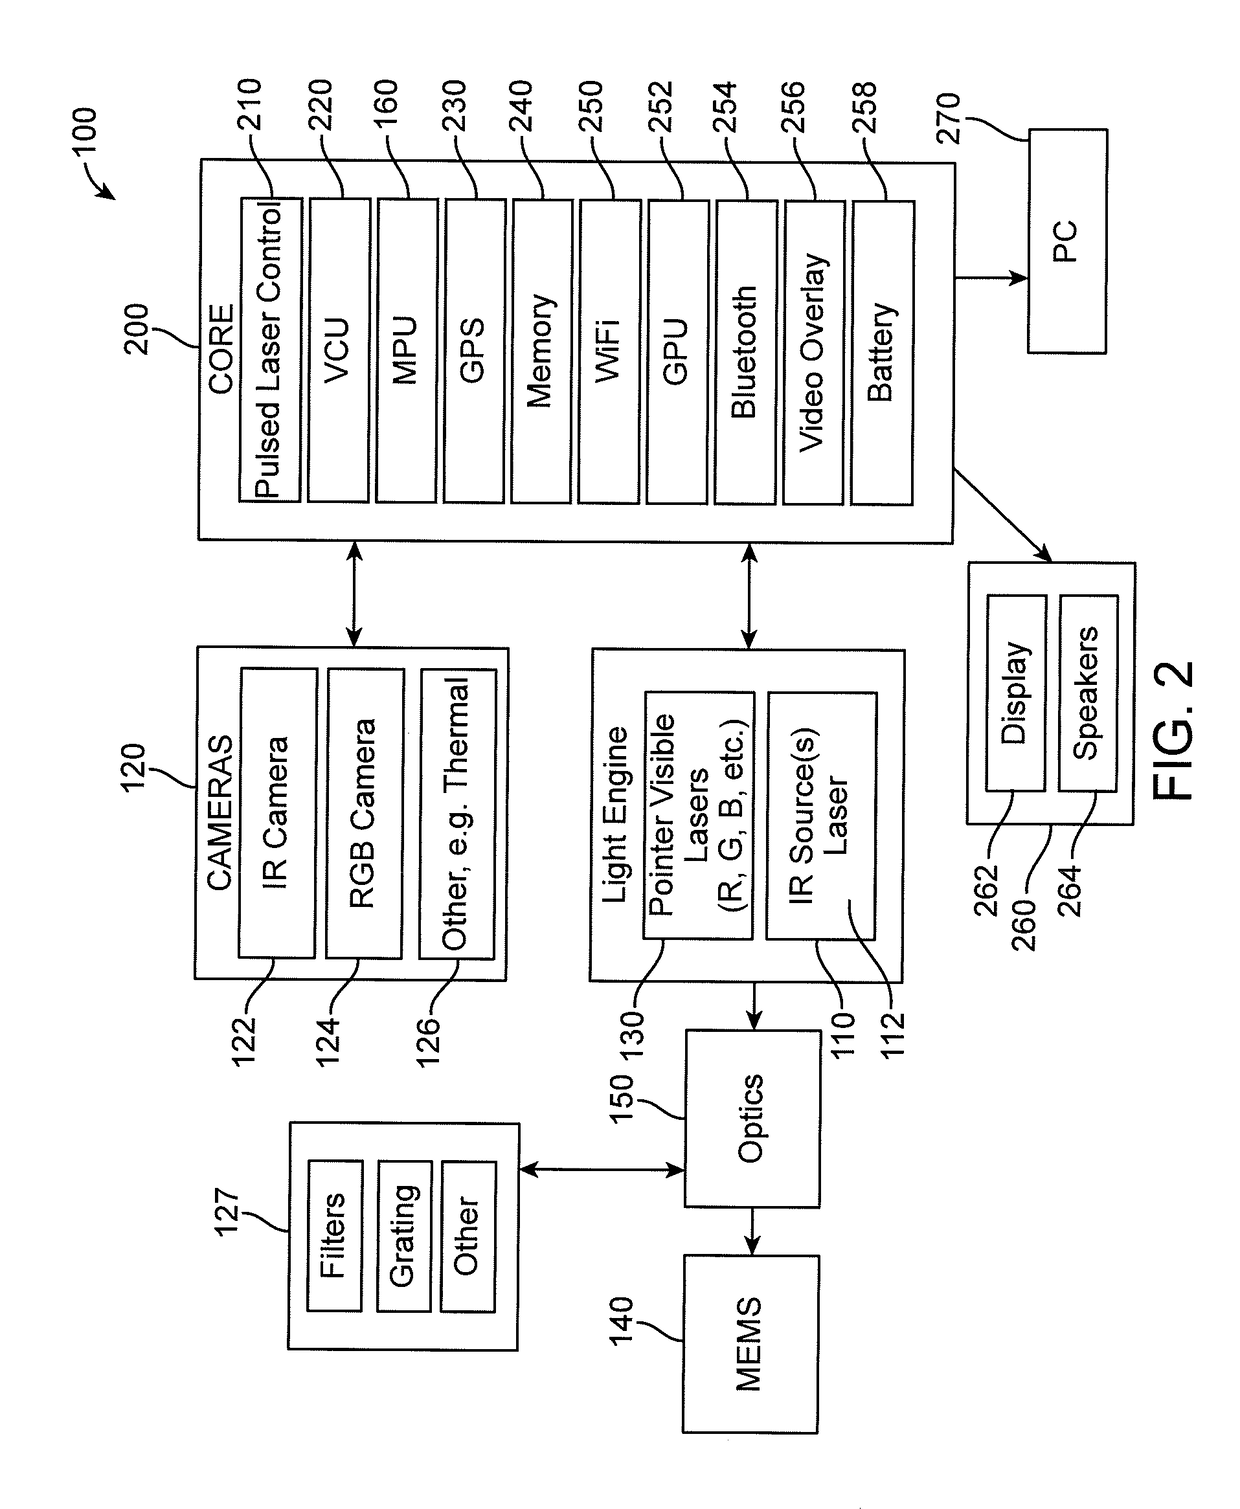 Laser scanning leak detection and visualization apparatus